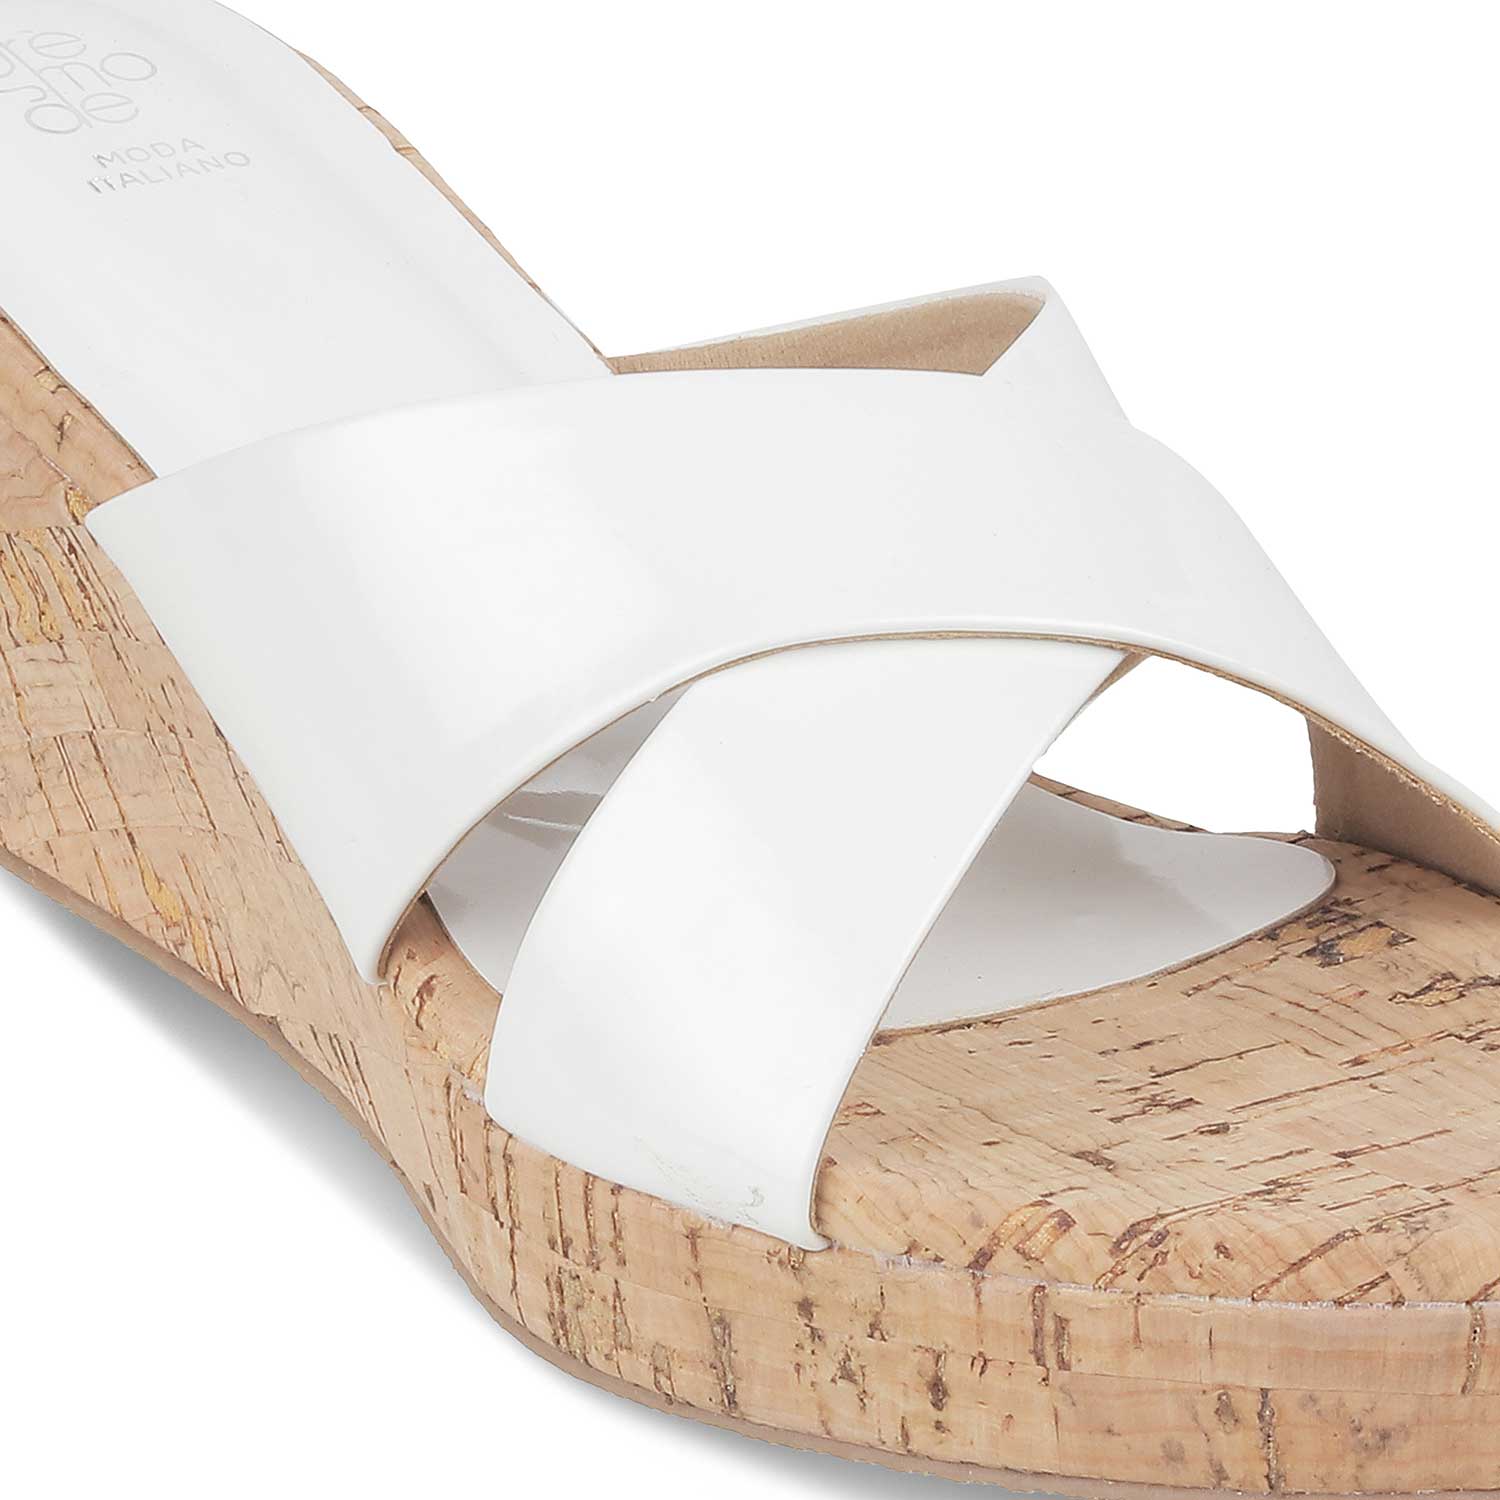 Tresmode-The Simmy White Women's Dress Wedges Tresmode-Tresmode